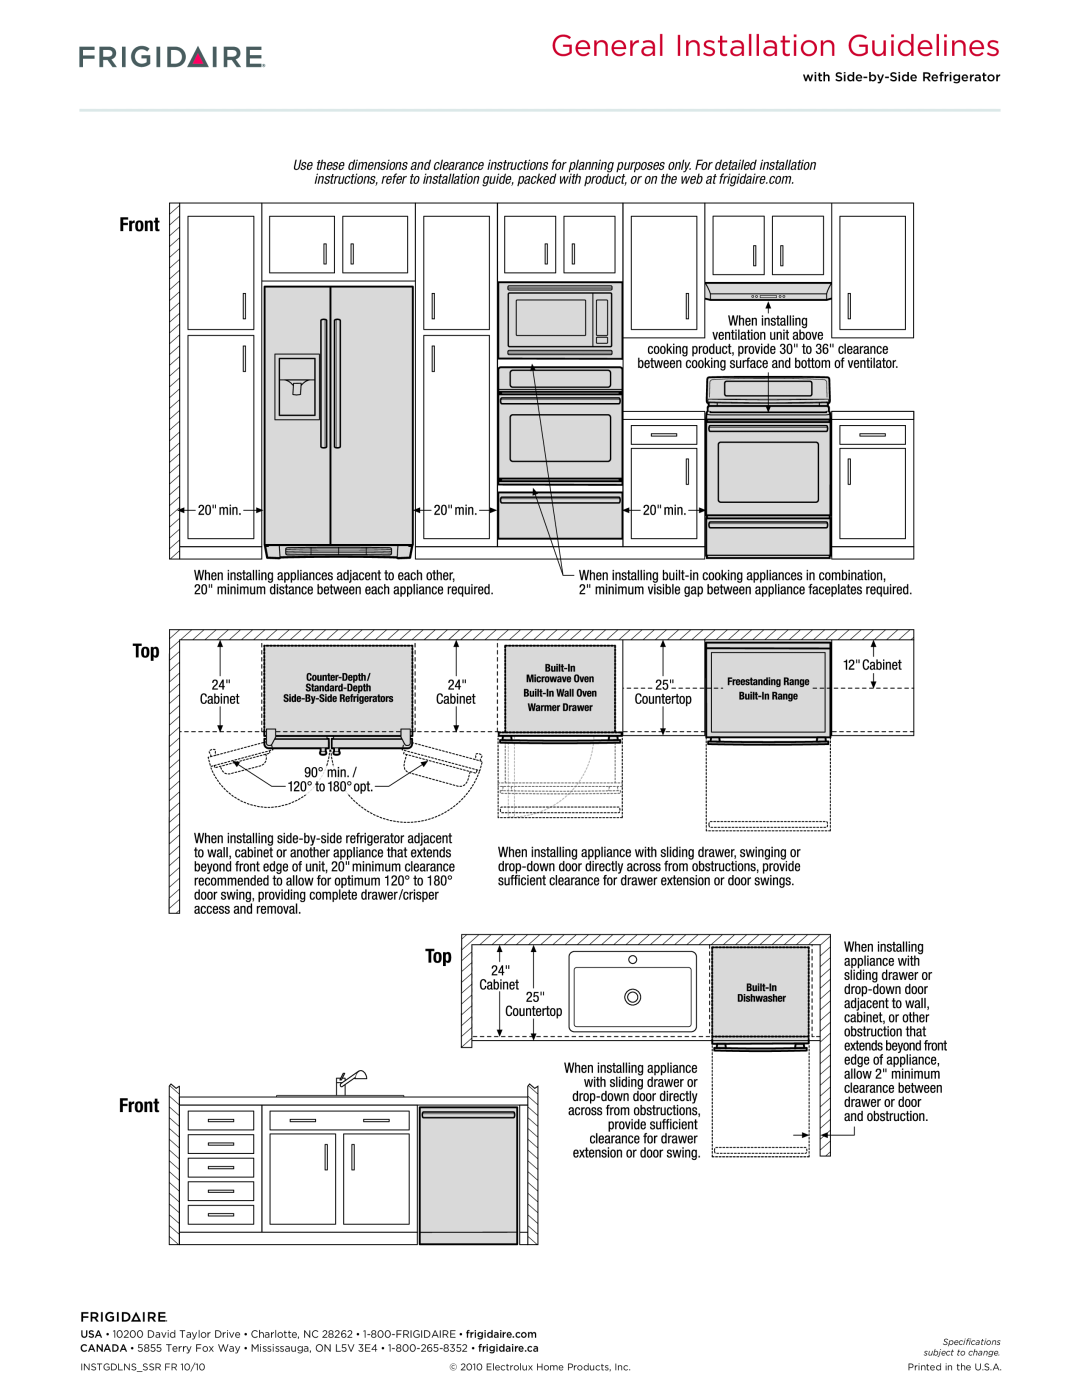 Frigidaire FGES3045K F/W/B dimensions General Installation Guidelines, Top Front 